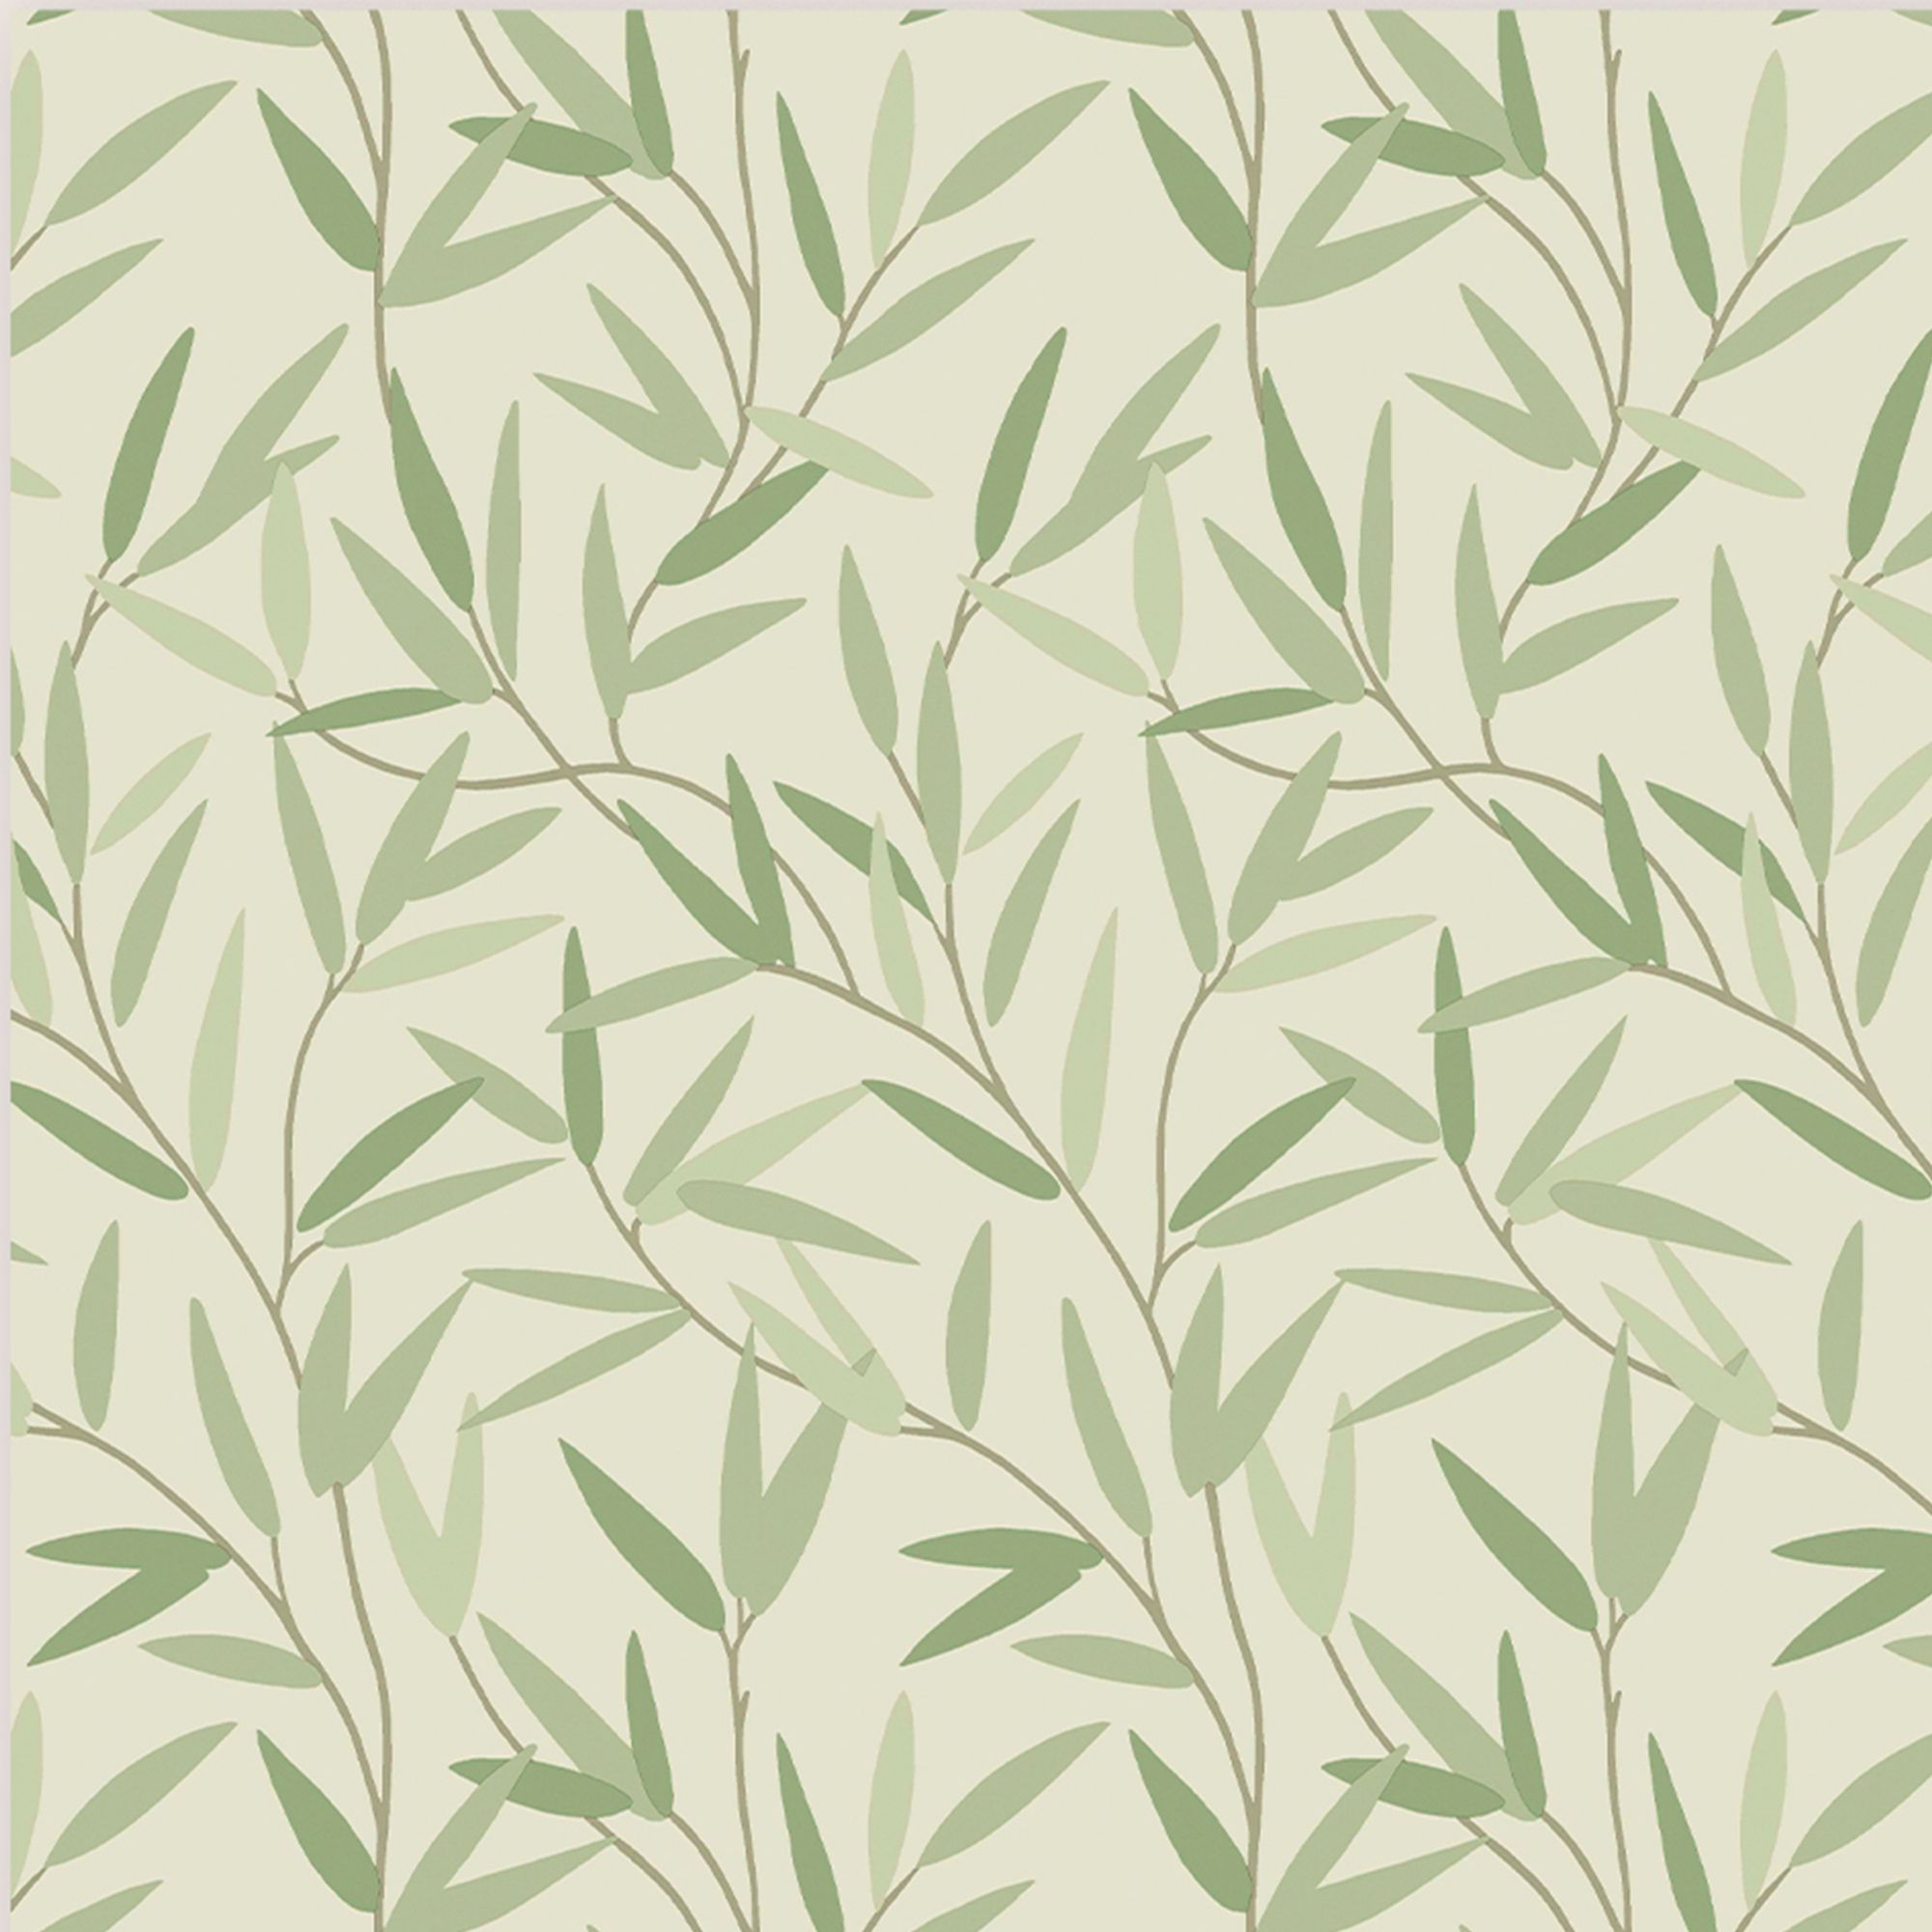 Laura Ashley Willow Hedgerow Leaf Smooth Wallpaper Sample